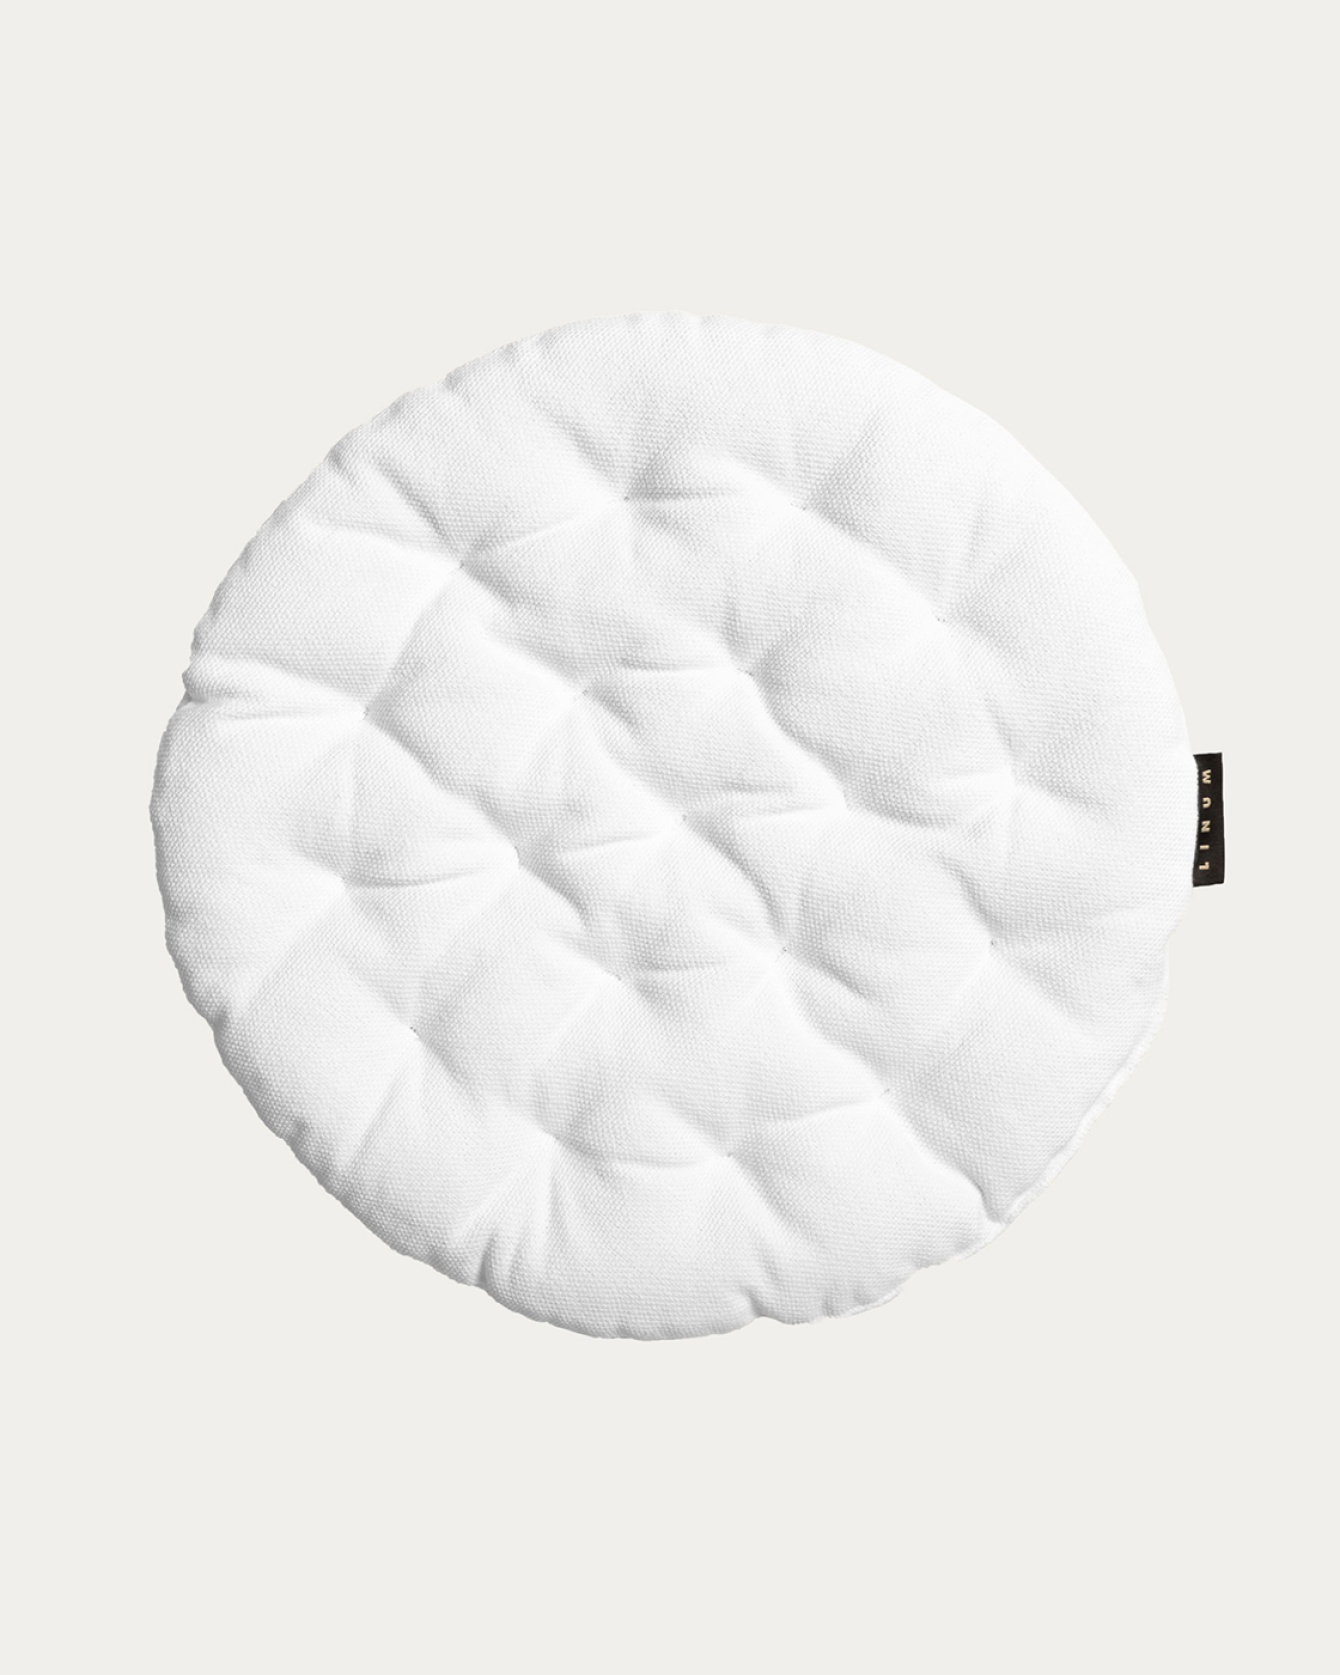 Product image white PEPPER seat cushion made of soft cotton with recycled polyester filling from LINUM DESIGN. Size ø37 cm.